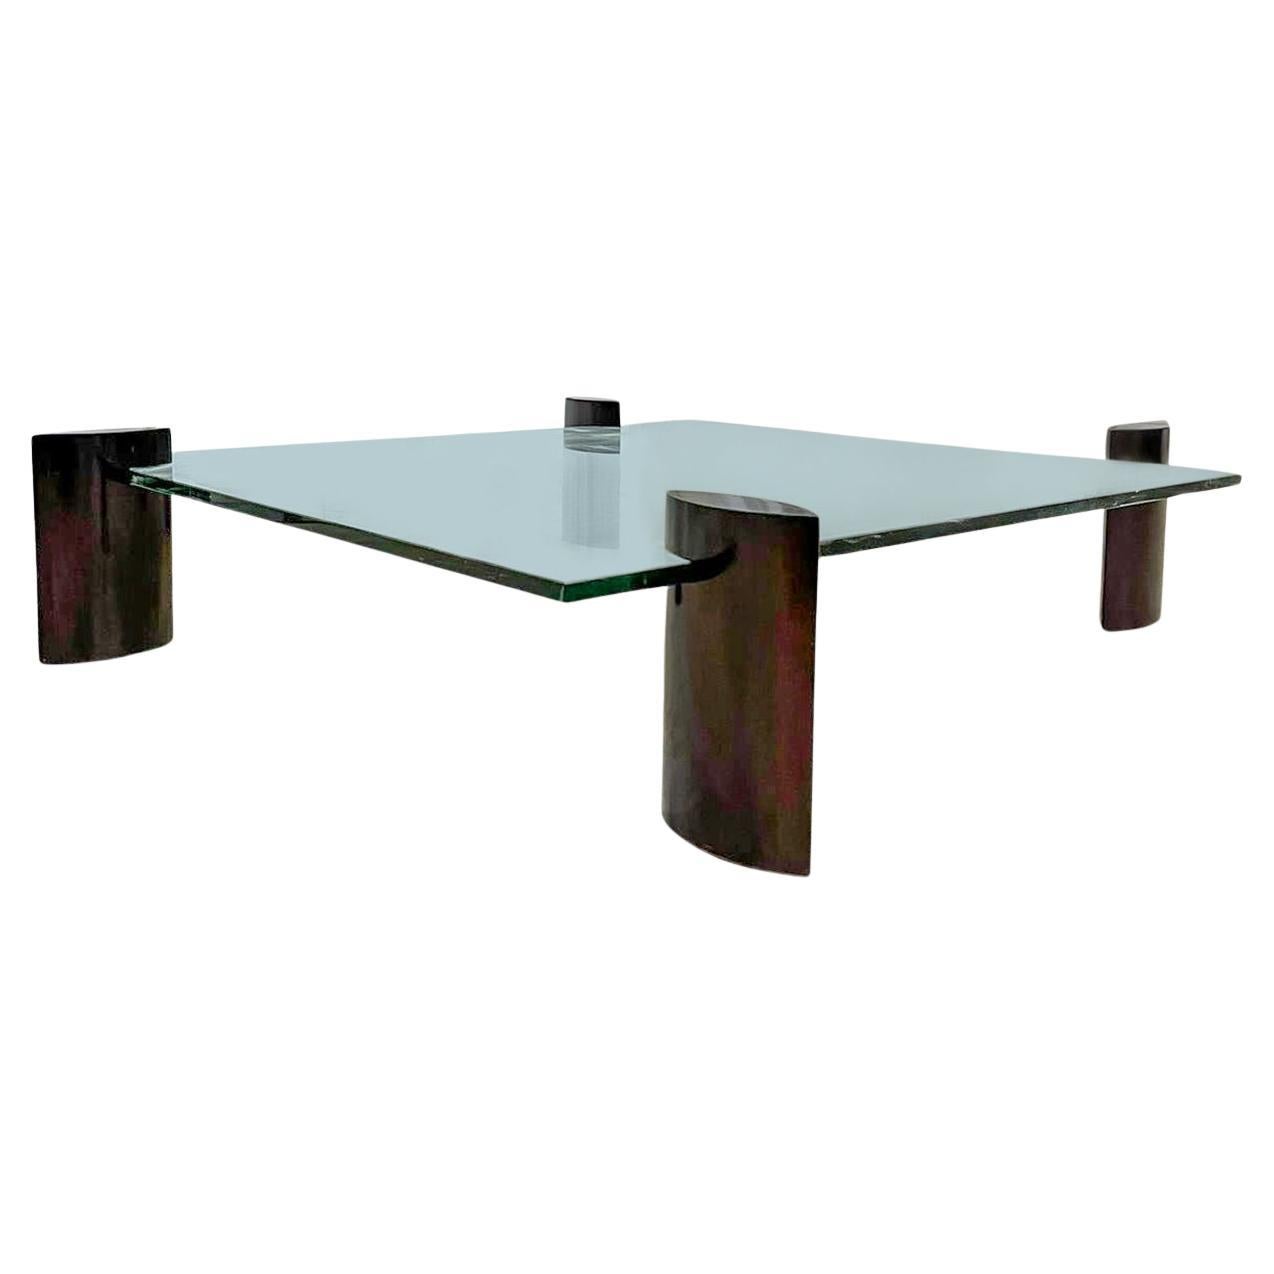 Mid Century Modern Coffee Table in Hardwood and Glass by Fatima, Brazil, 1960s